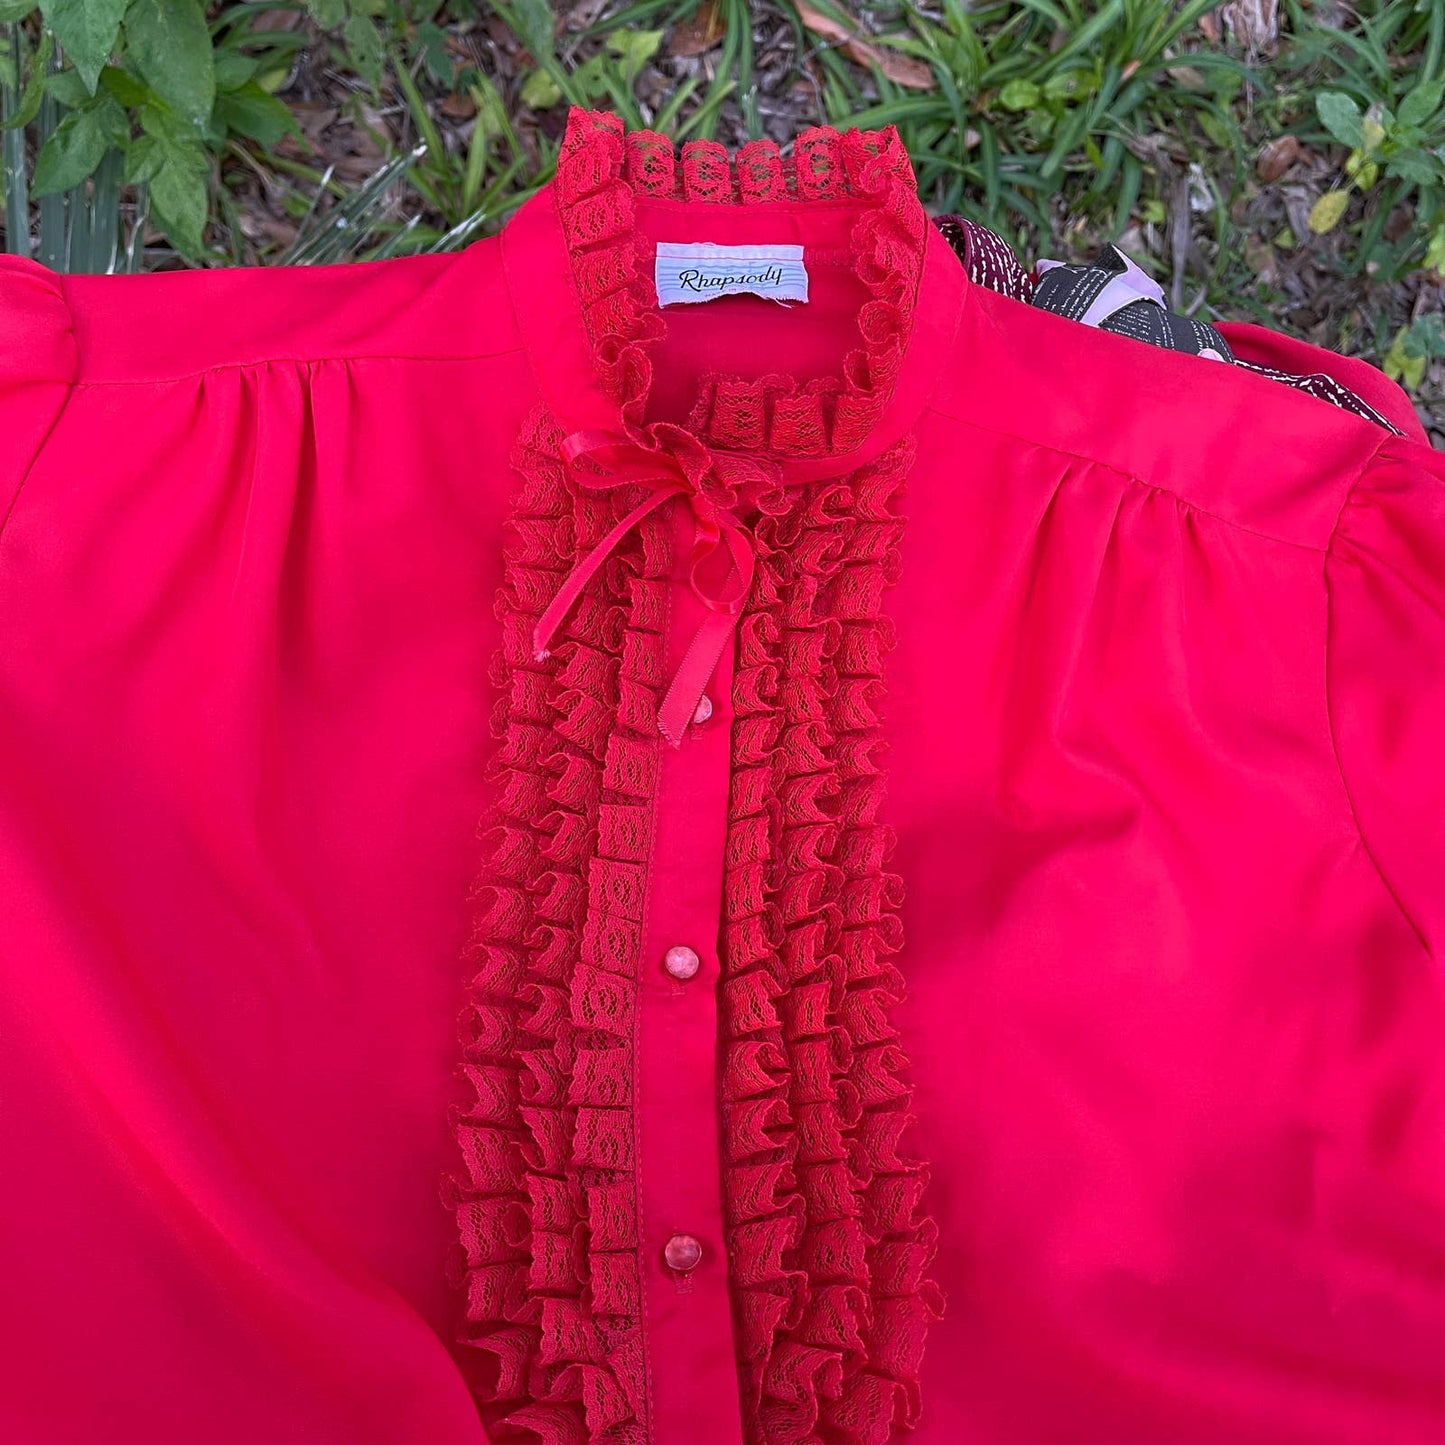 Vintage 80s Bright Red Tuxedo Ruffle Button Up Blouse Rhapsody Size M L